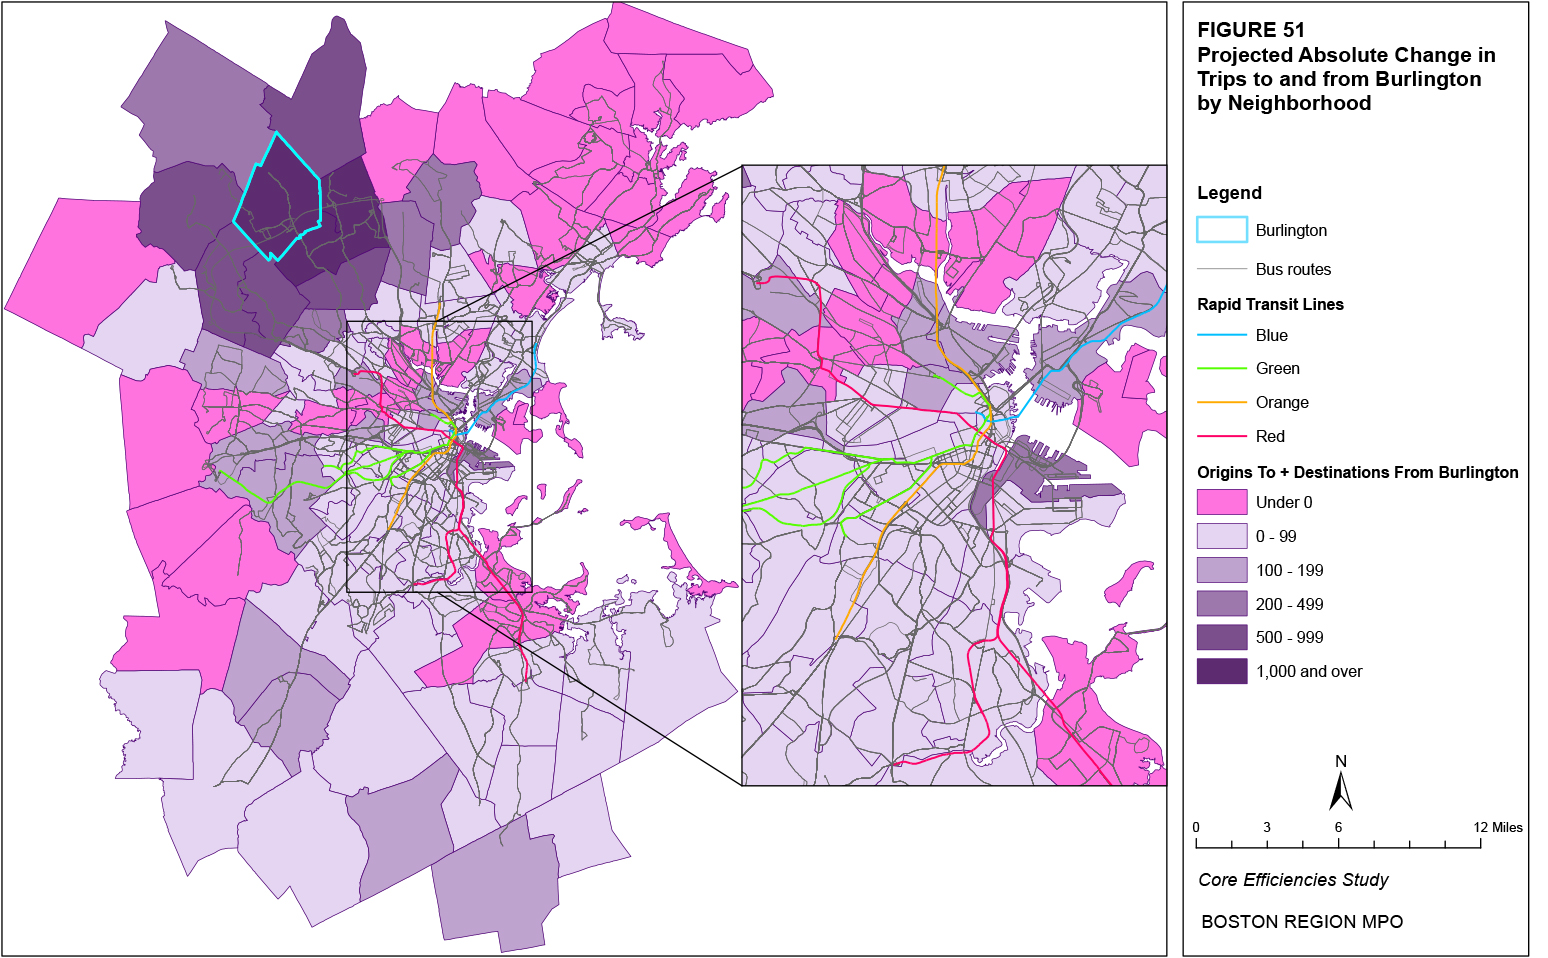 This map shows the projected absolute change in trips to and from the Burlington neighborhood by neighborhood.